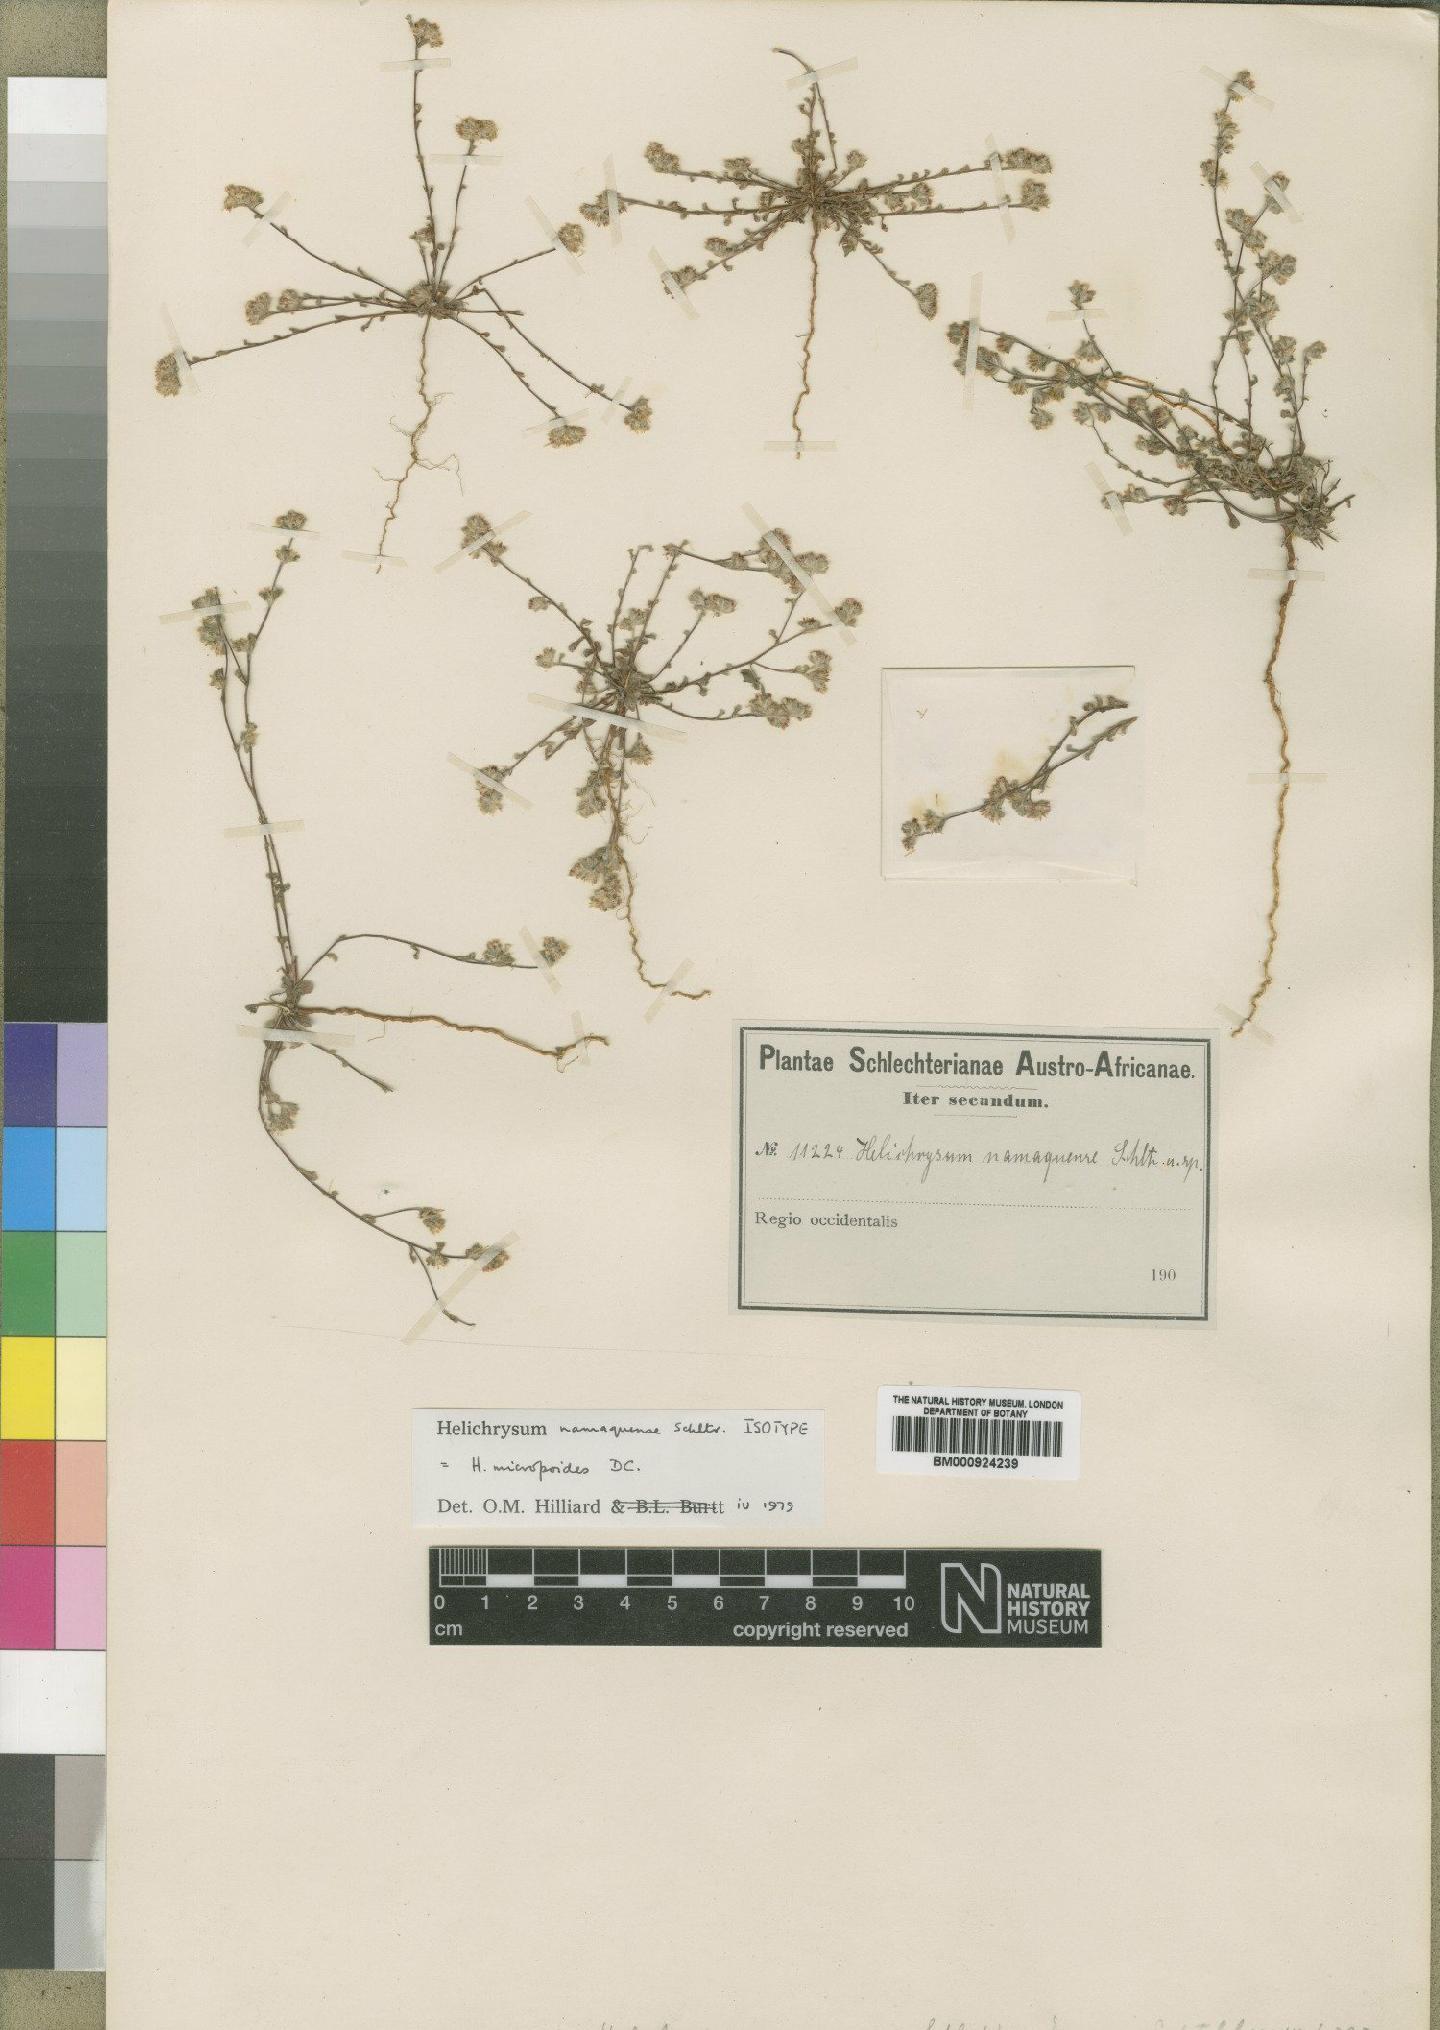 To NHMUK collection (Helichrysum micropoides DC.; Isotype; NHMUK:ecatalogue:4529267)